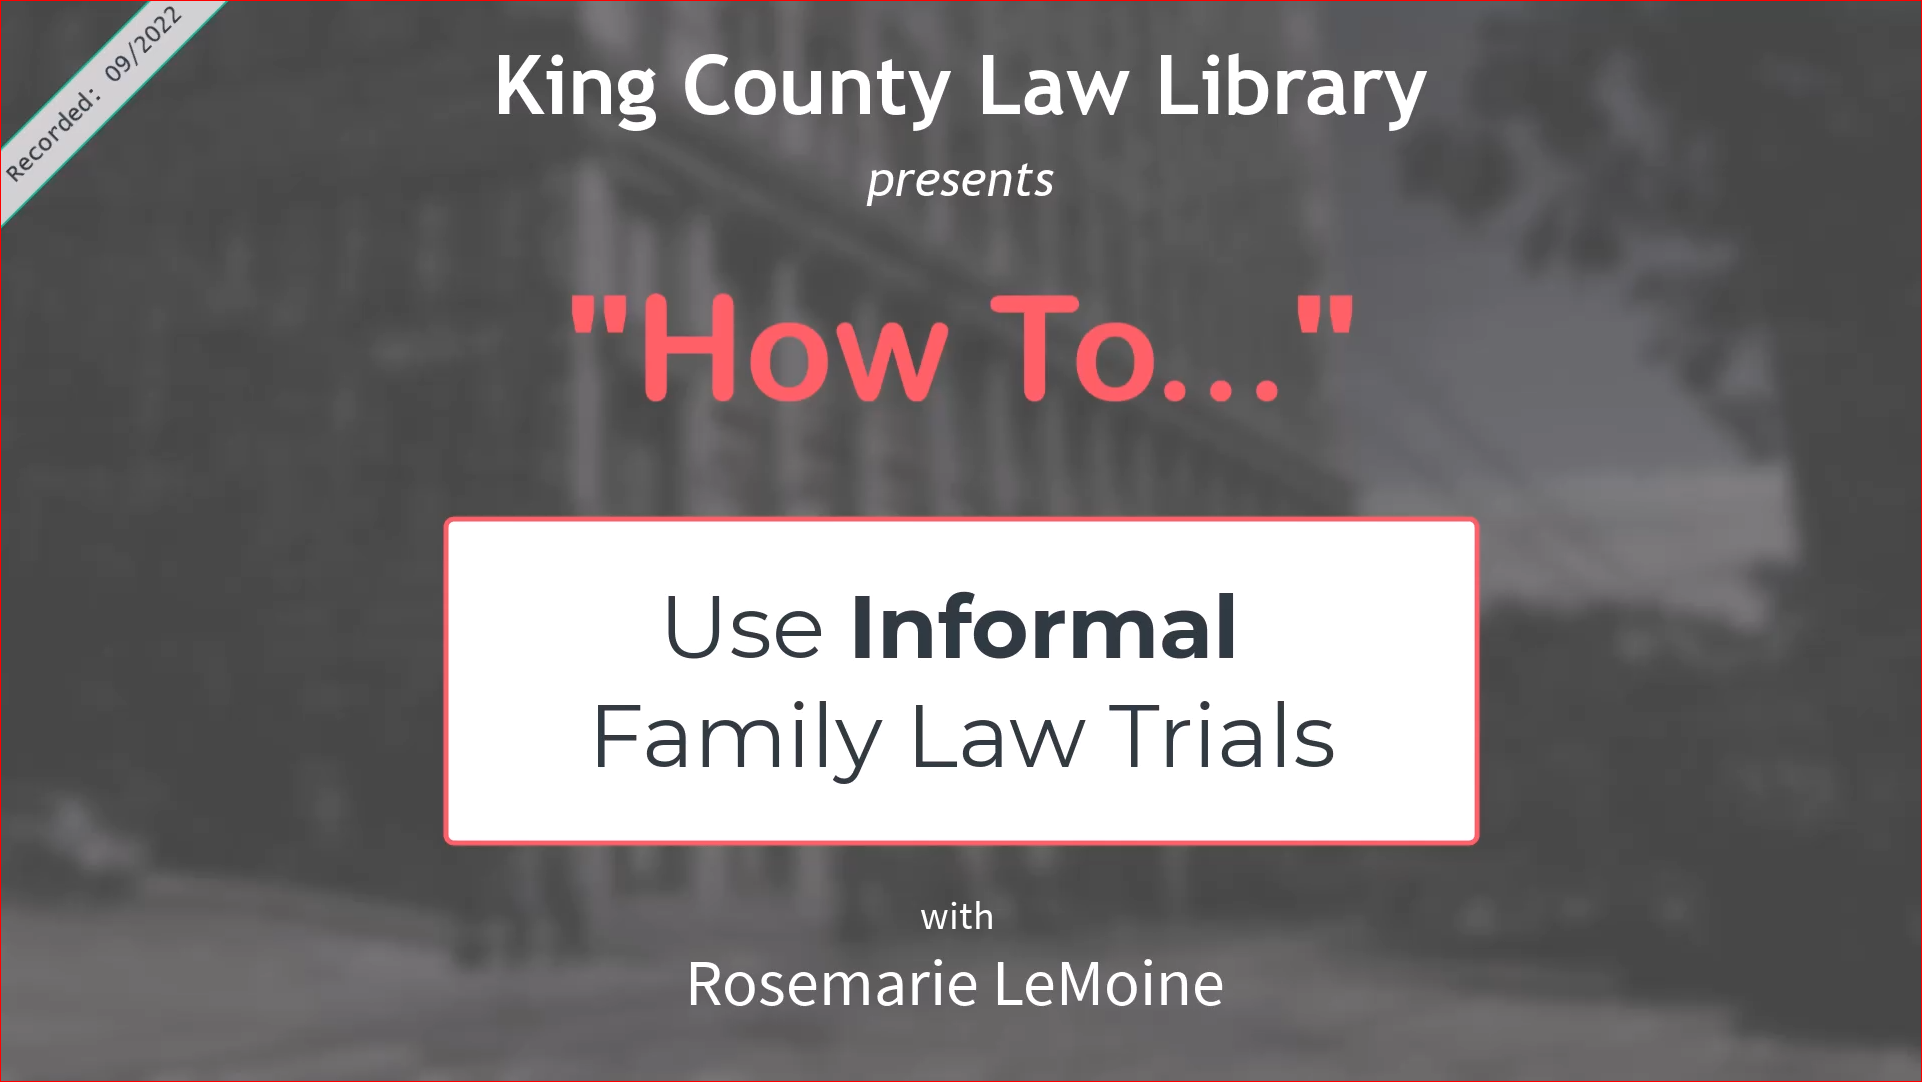 HOW TO... Use Informal Family Law Trials (09/2022)